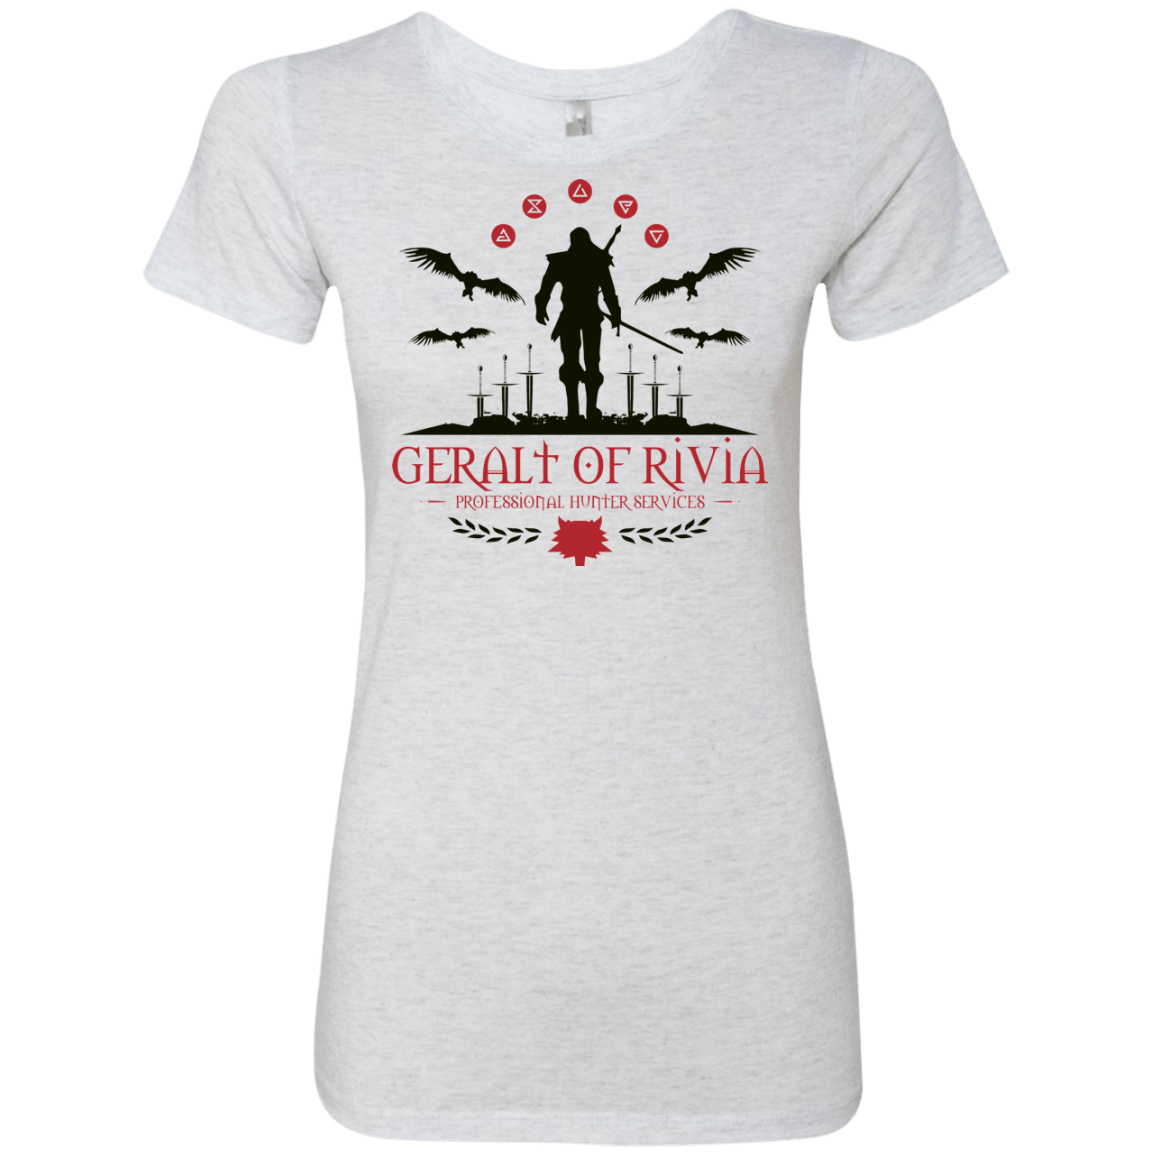 T-Shirts Heather White / Small The Witcher 3 Wild Hunt Women's Triblend T-Shirt